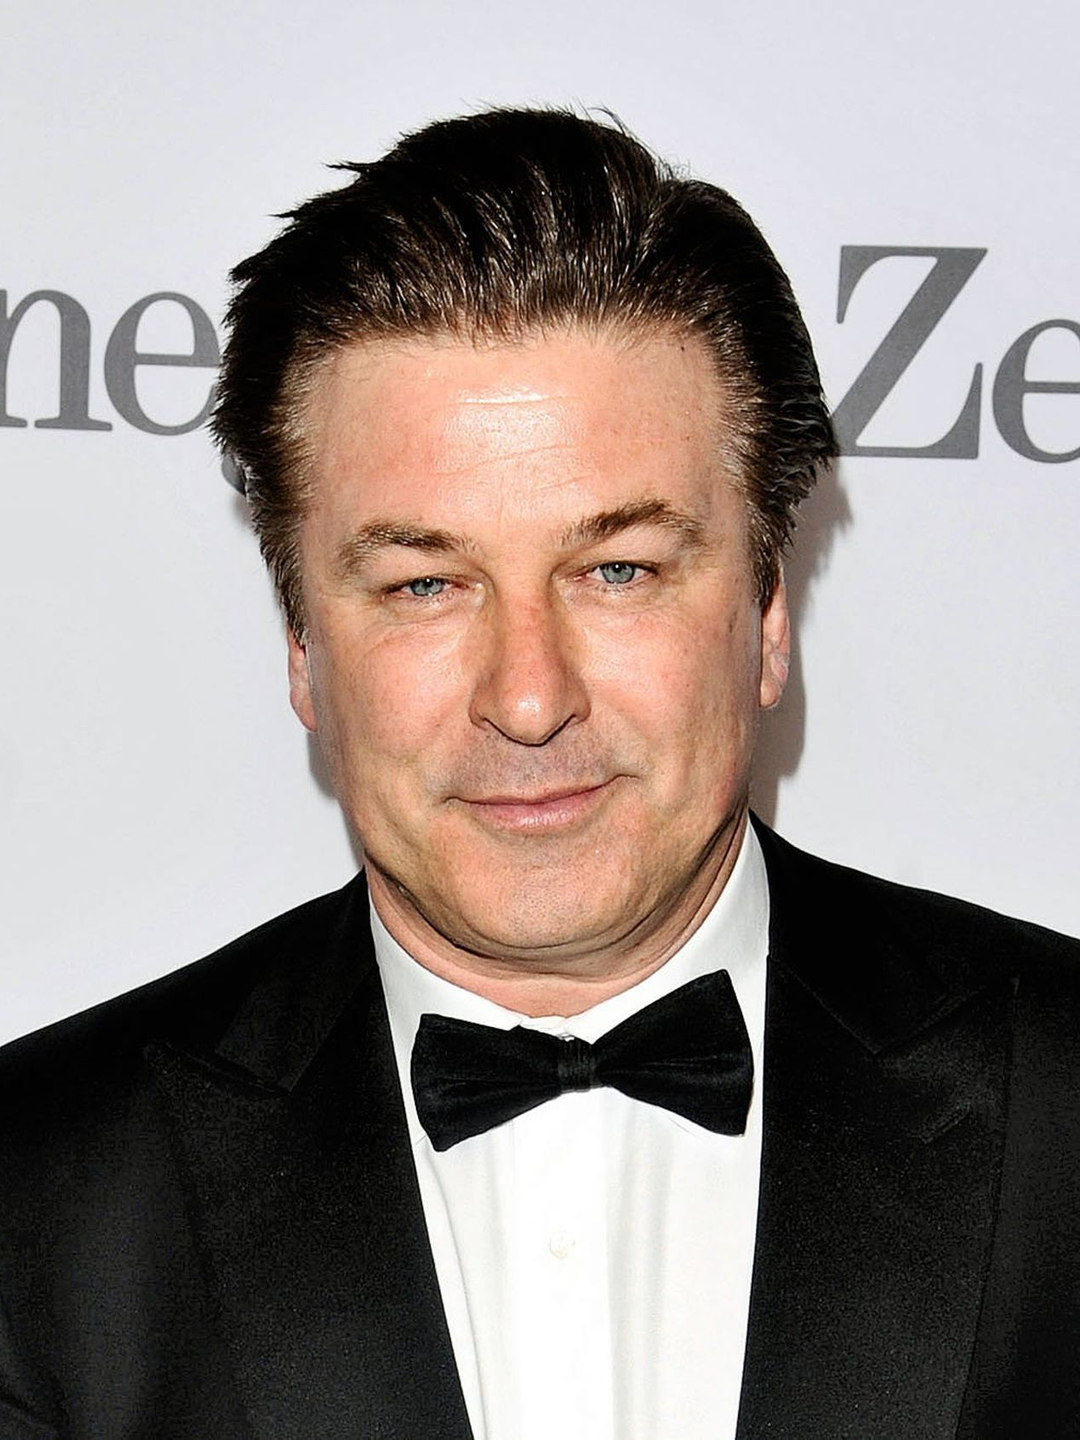 Alec Baldwin who is his father